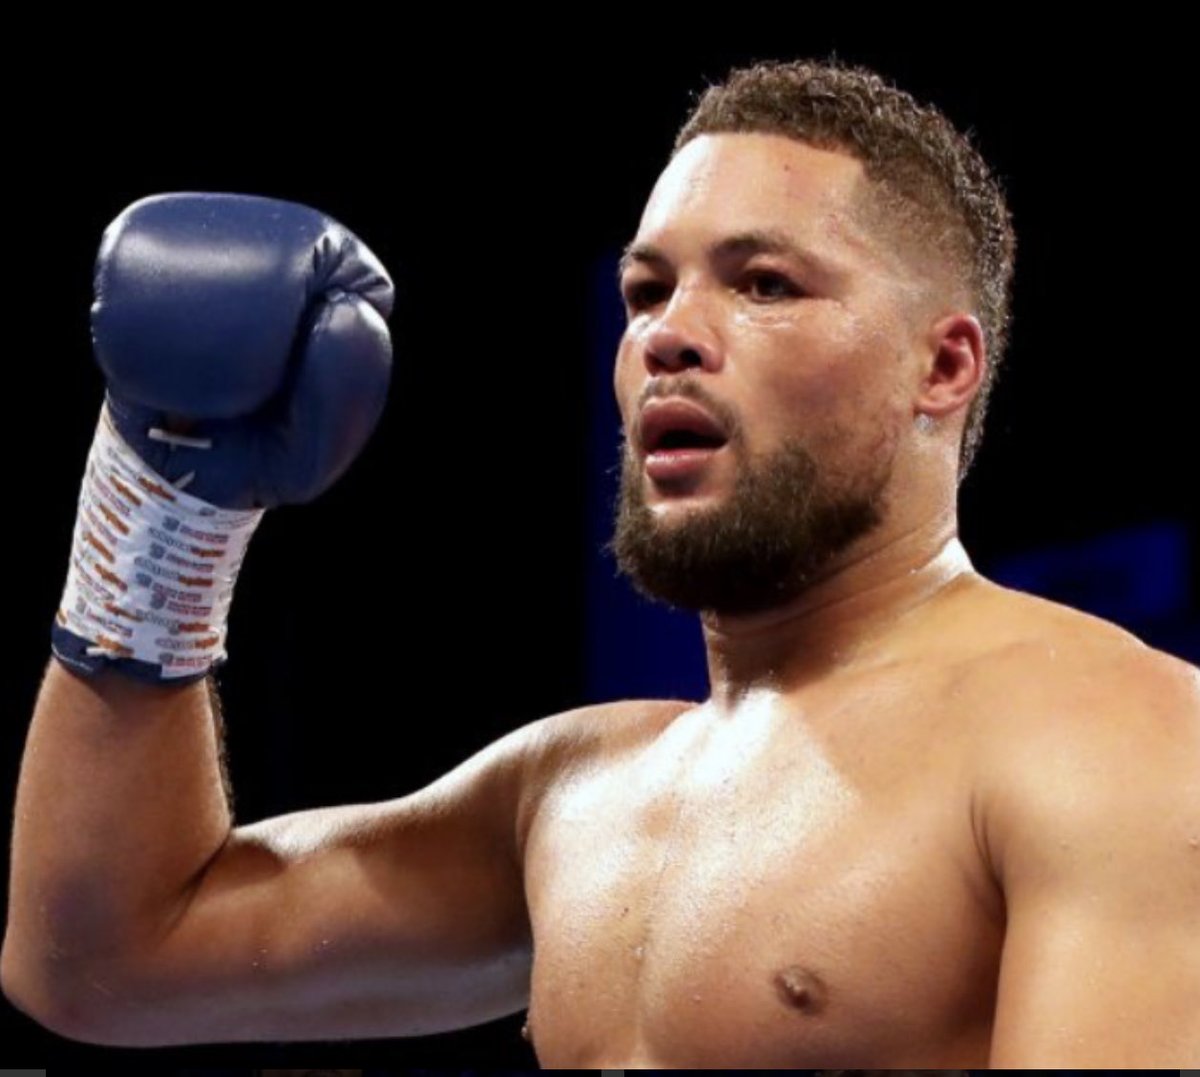 £100 GIVEAWAY…if the Juggernaut JOE JOYCE gets his revenge on Big Zhang tonight one of you will win 100 smackers…just follow + retweet to enter (over 18’s)